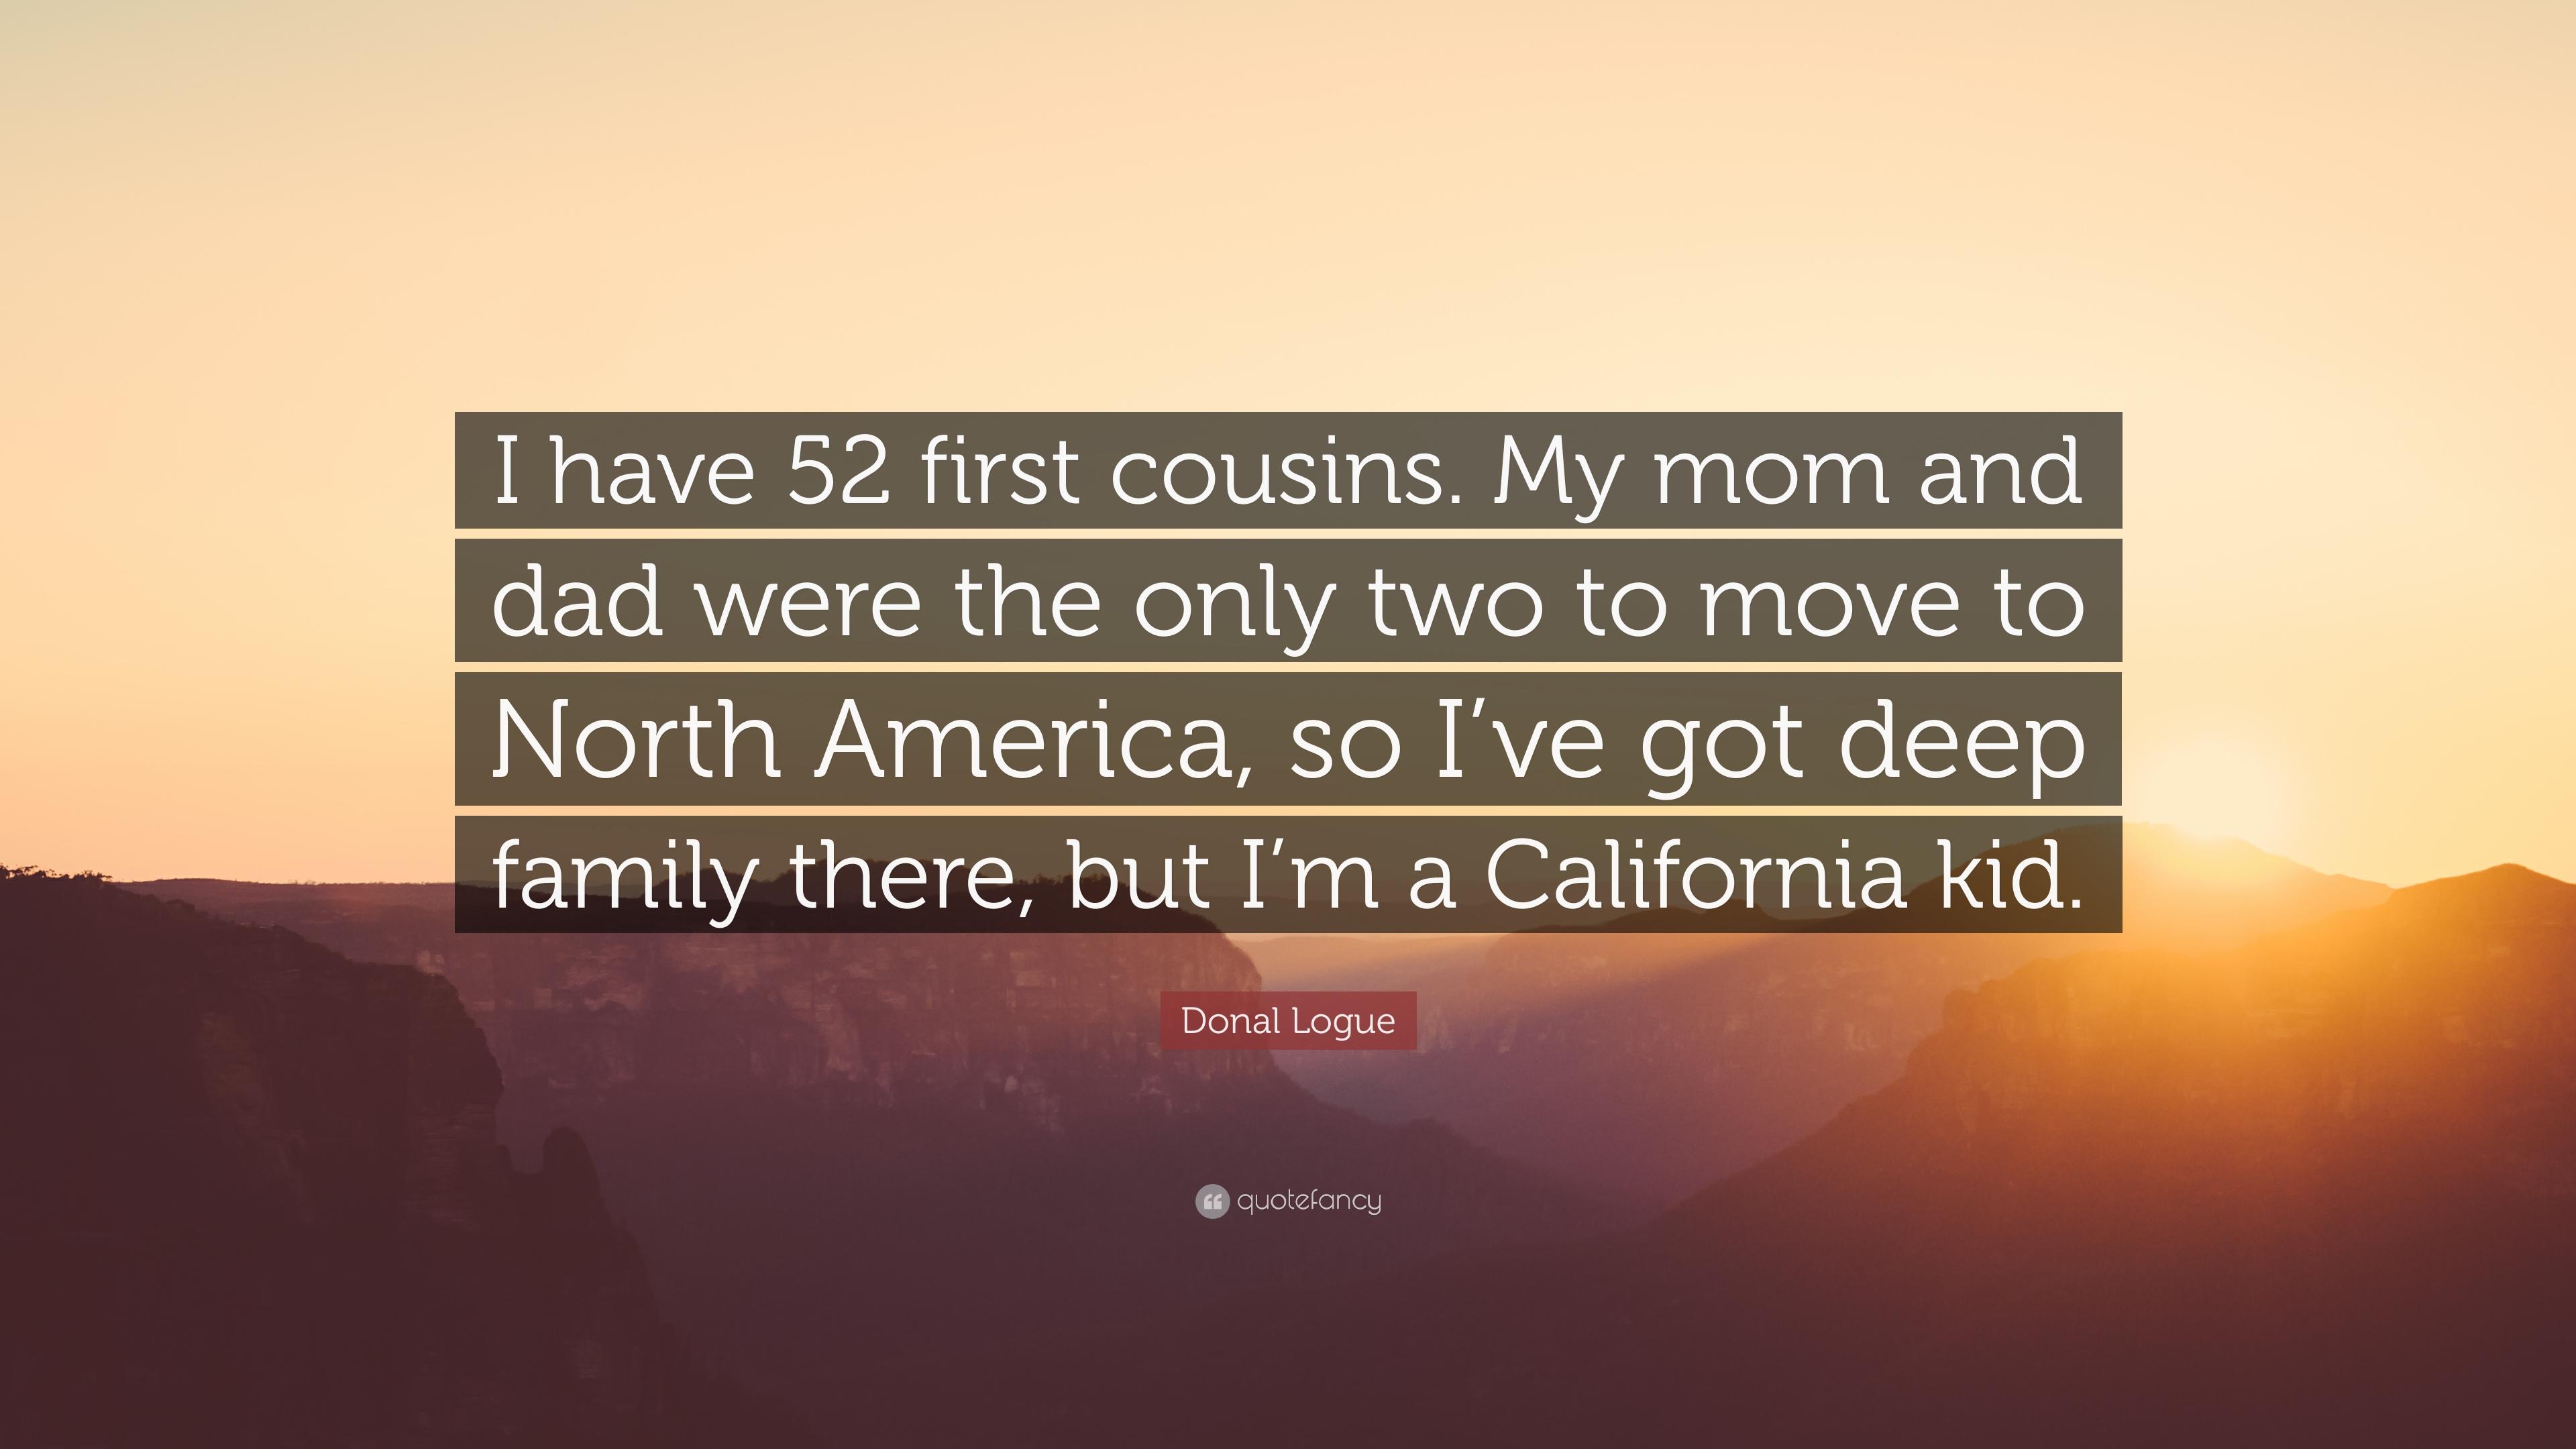 Donal Logue Quote: “I have 52 first cousins. My mom and dad